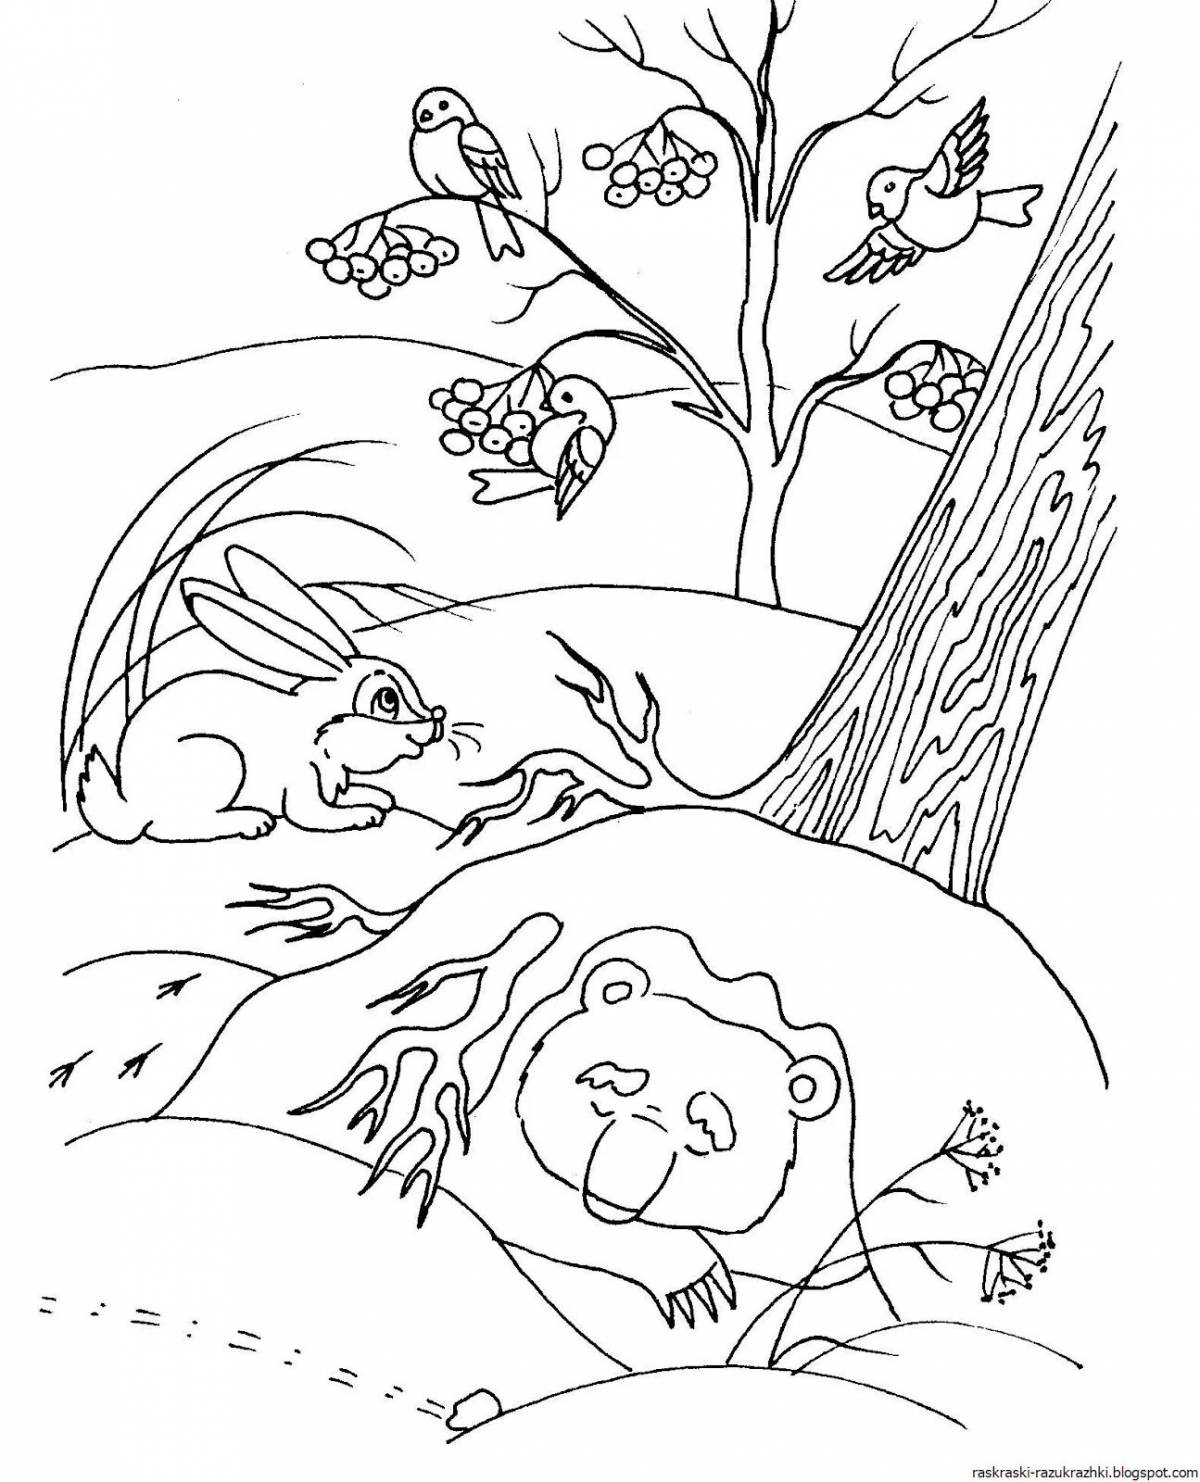 Funny bear in a den coloring book for children